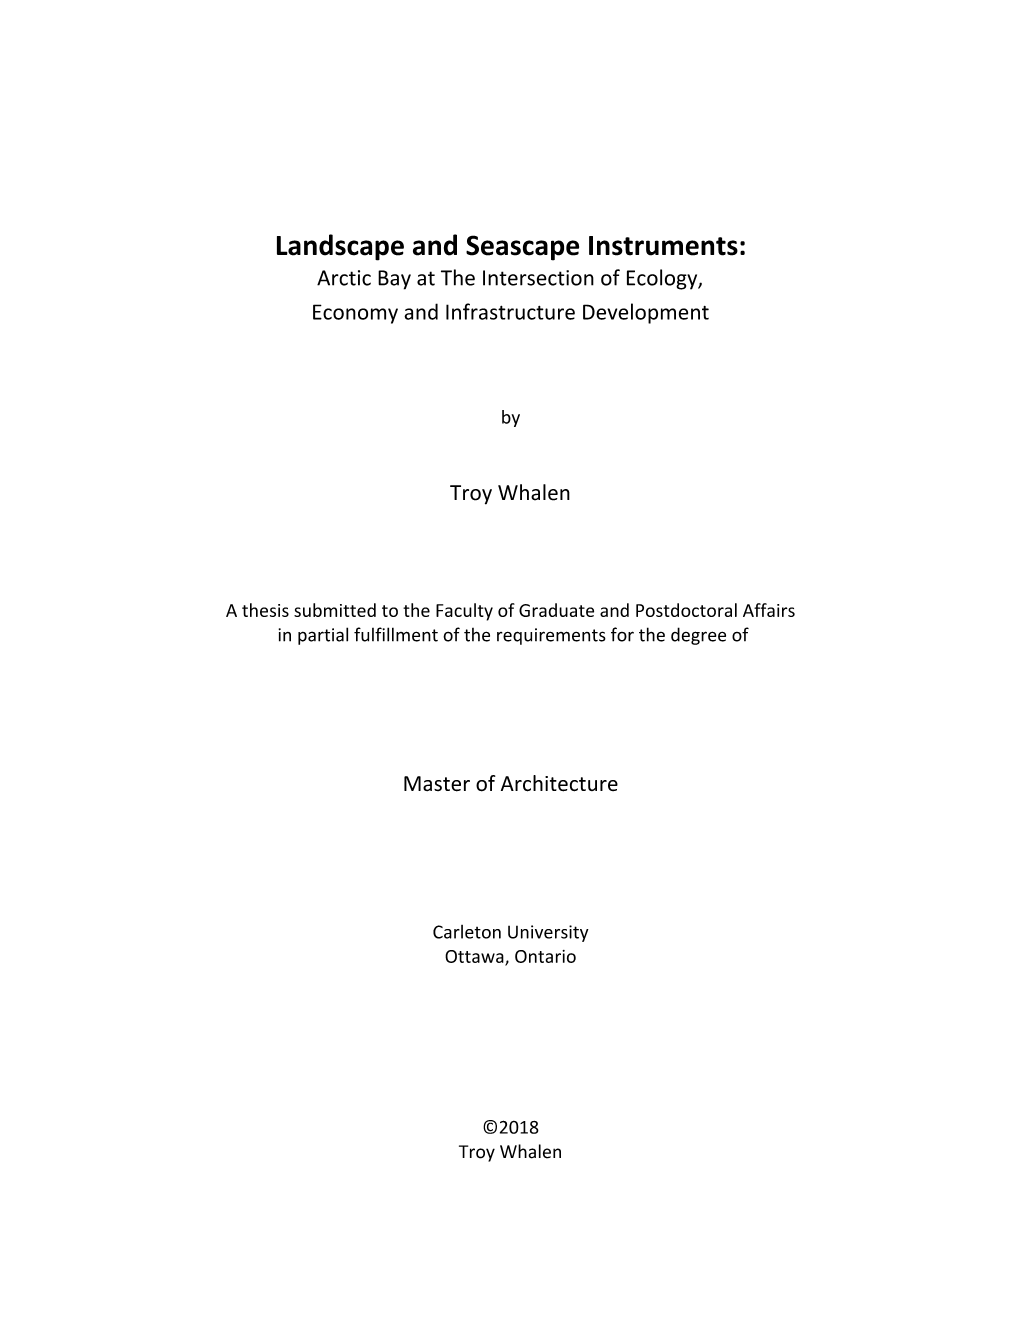 Landscape and Seascape Instruments: Arctic Bay at the Intersection of Ecology, Economy and Infrastructure Development